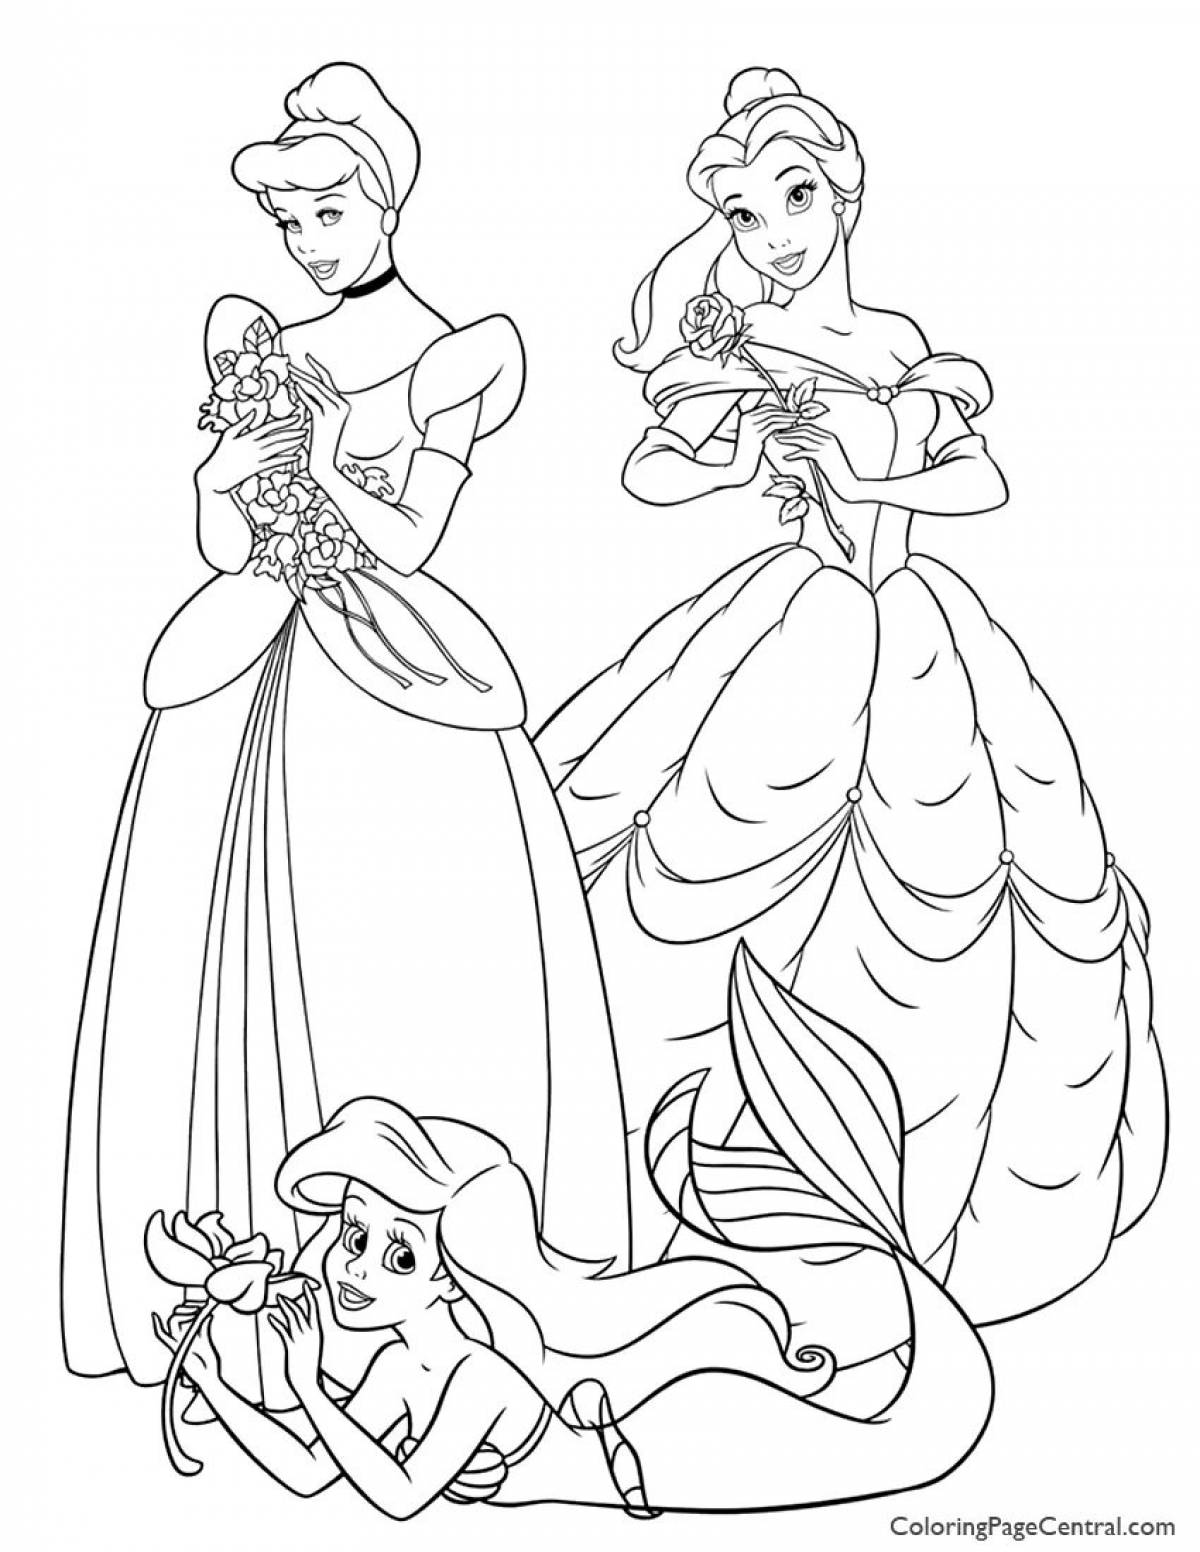 Poetic coloring book include princesses